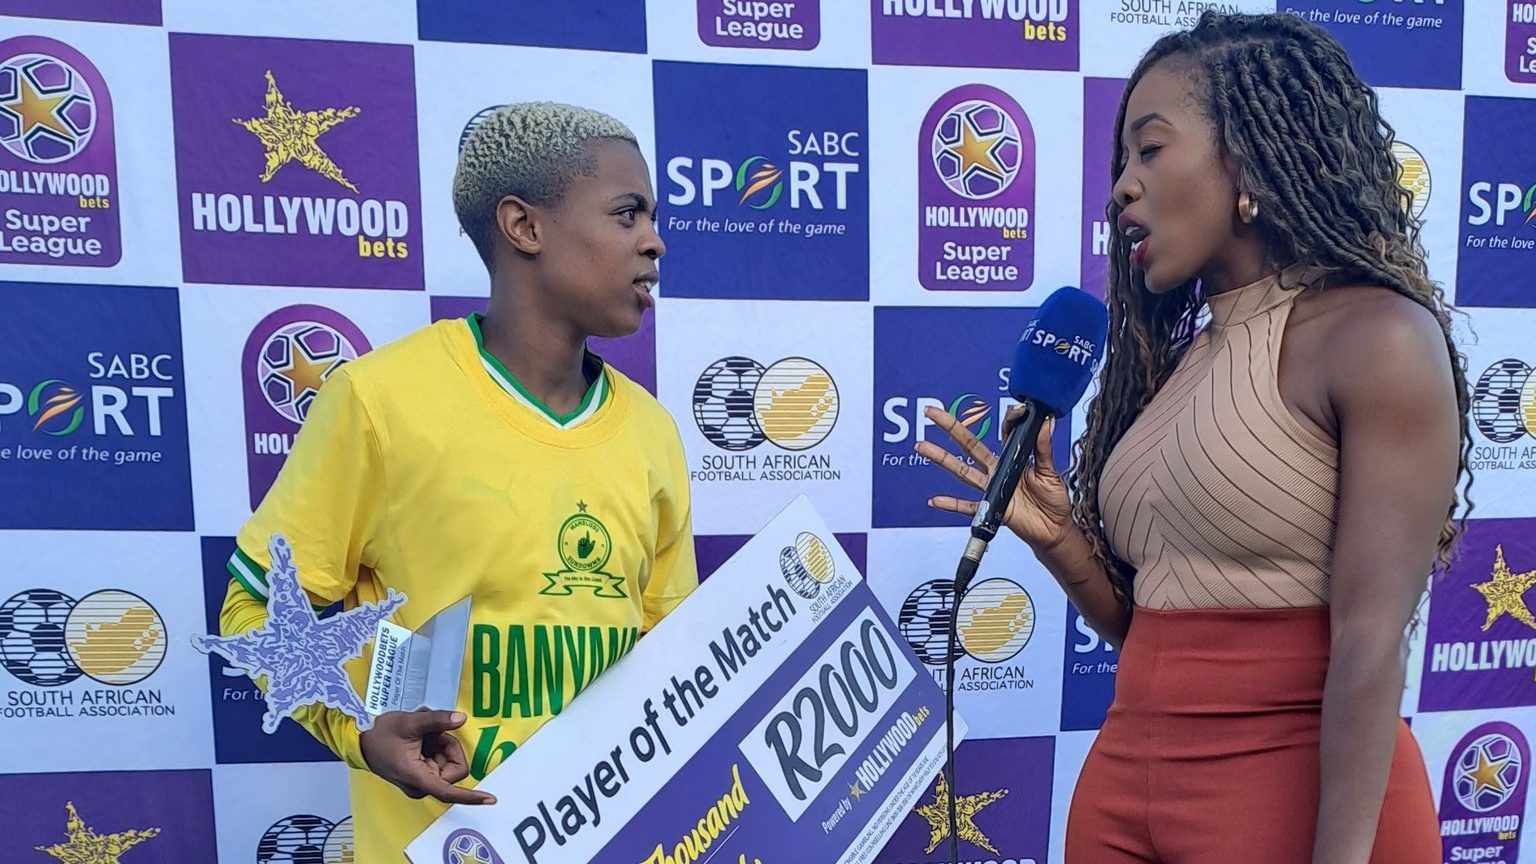 Lelona Daweti receives the Hollywoodbets Super League Player of the Match accolade 